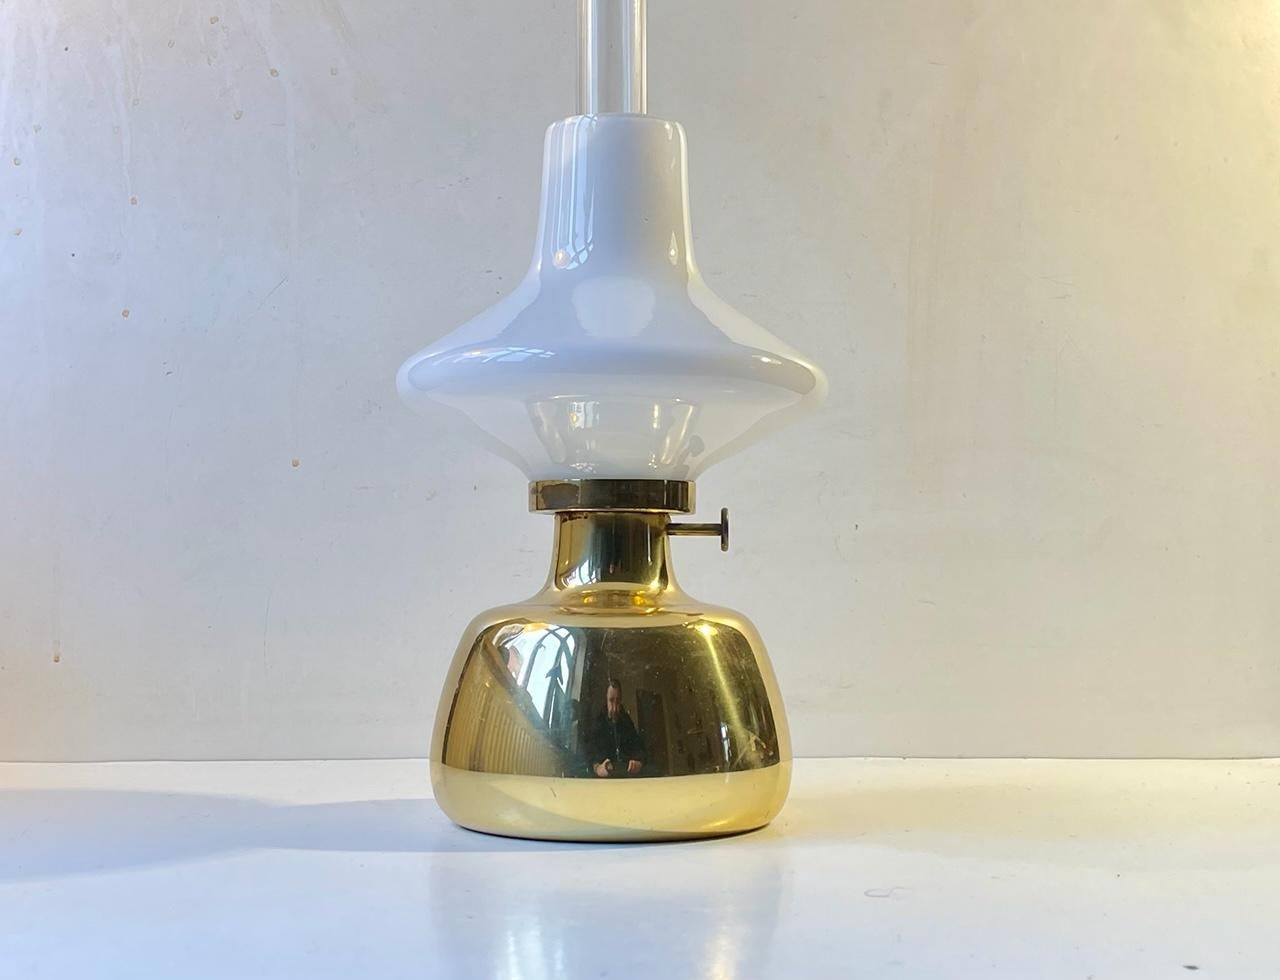 Designed by Henning Koppel (1918-81) in the 60s and manufactured by Louis Poulsen in the 1970s, the Petronella oil lamp is made from solid brass and has an opaline glass shade with internal chimney in clear glass. Measures: H: 33 cm, D: 19 cm